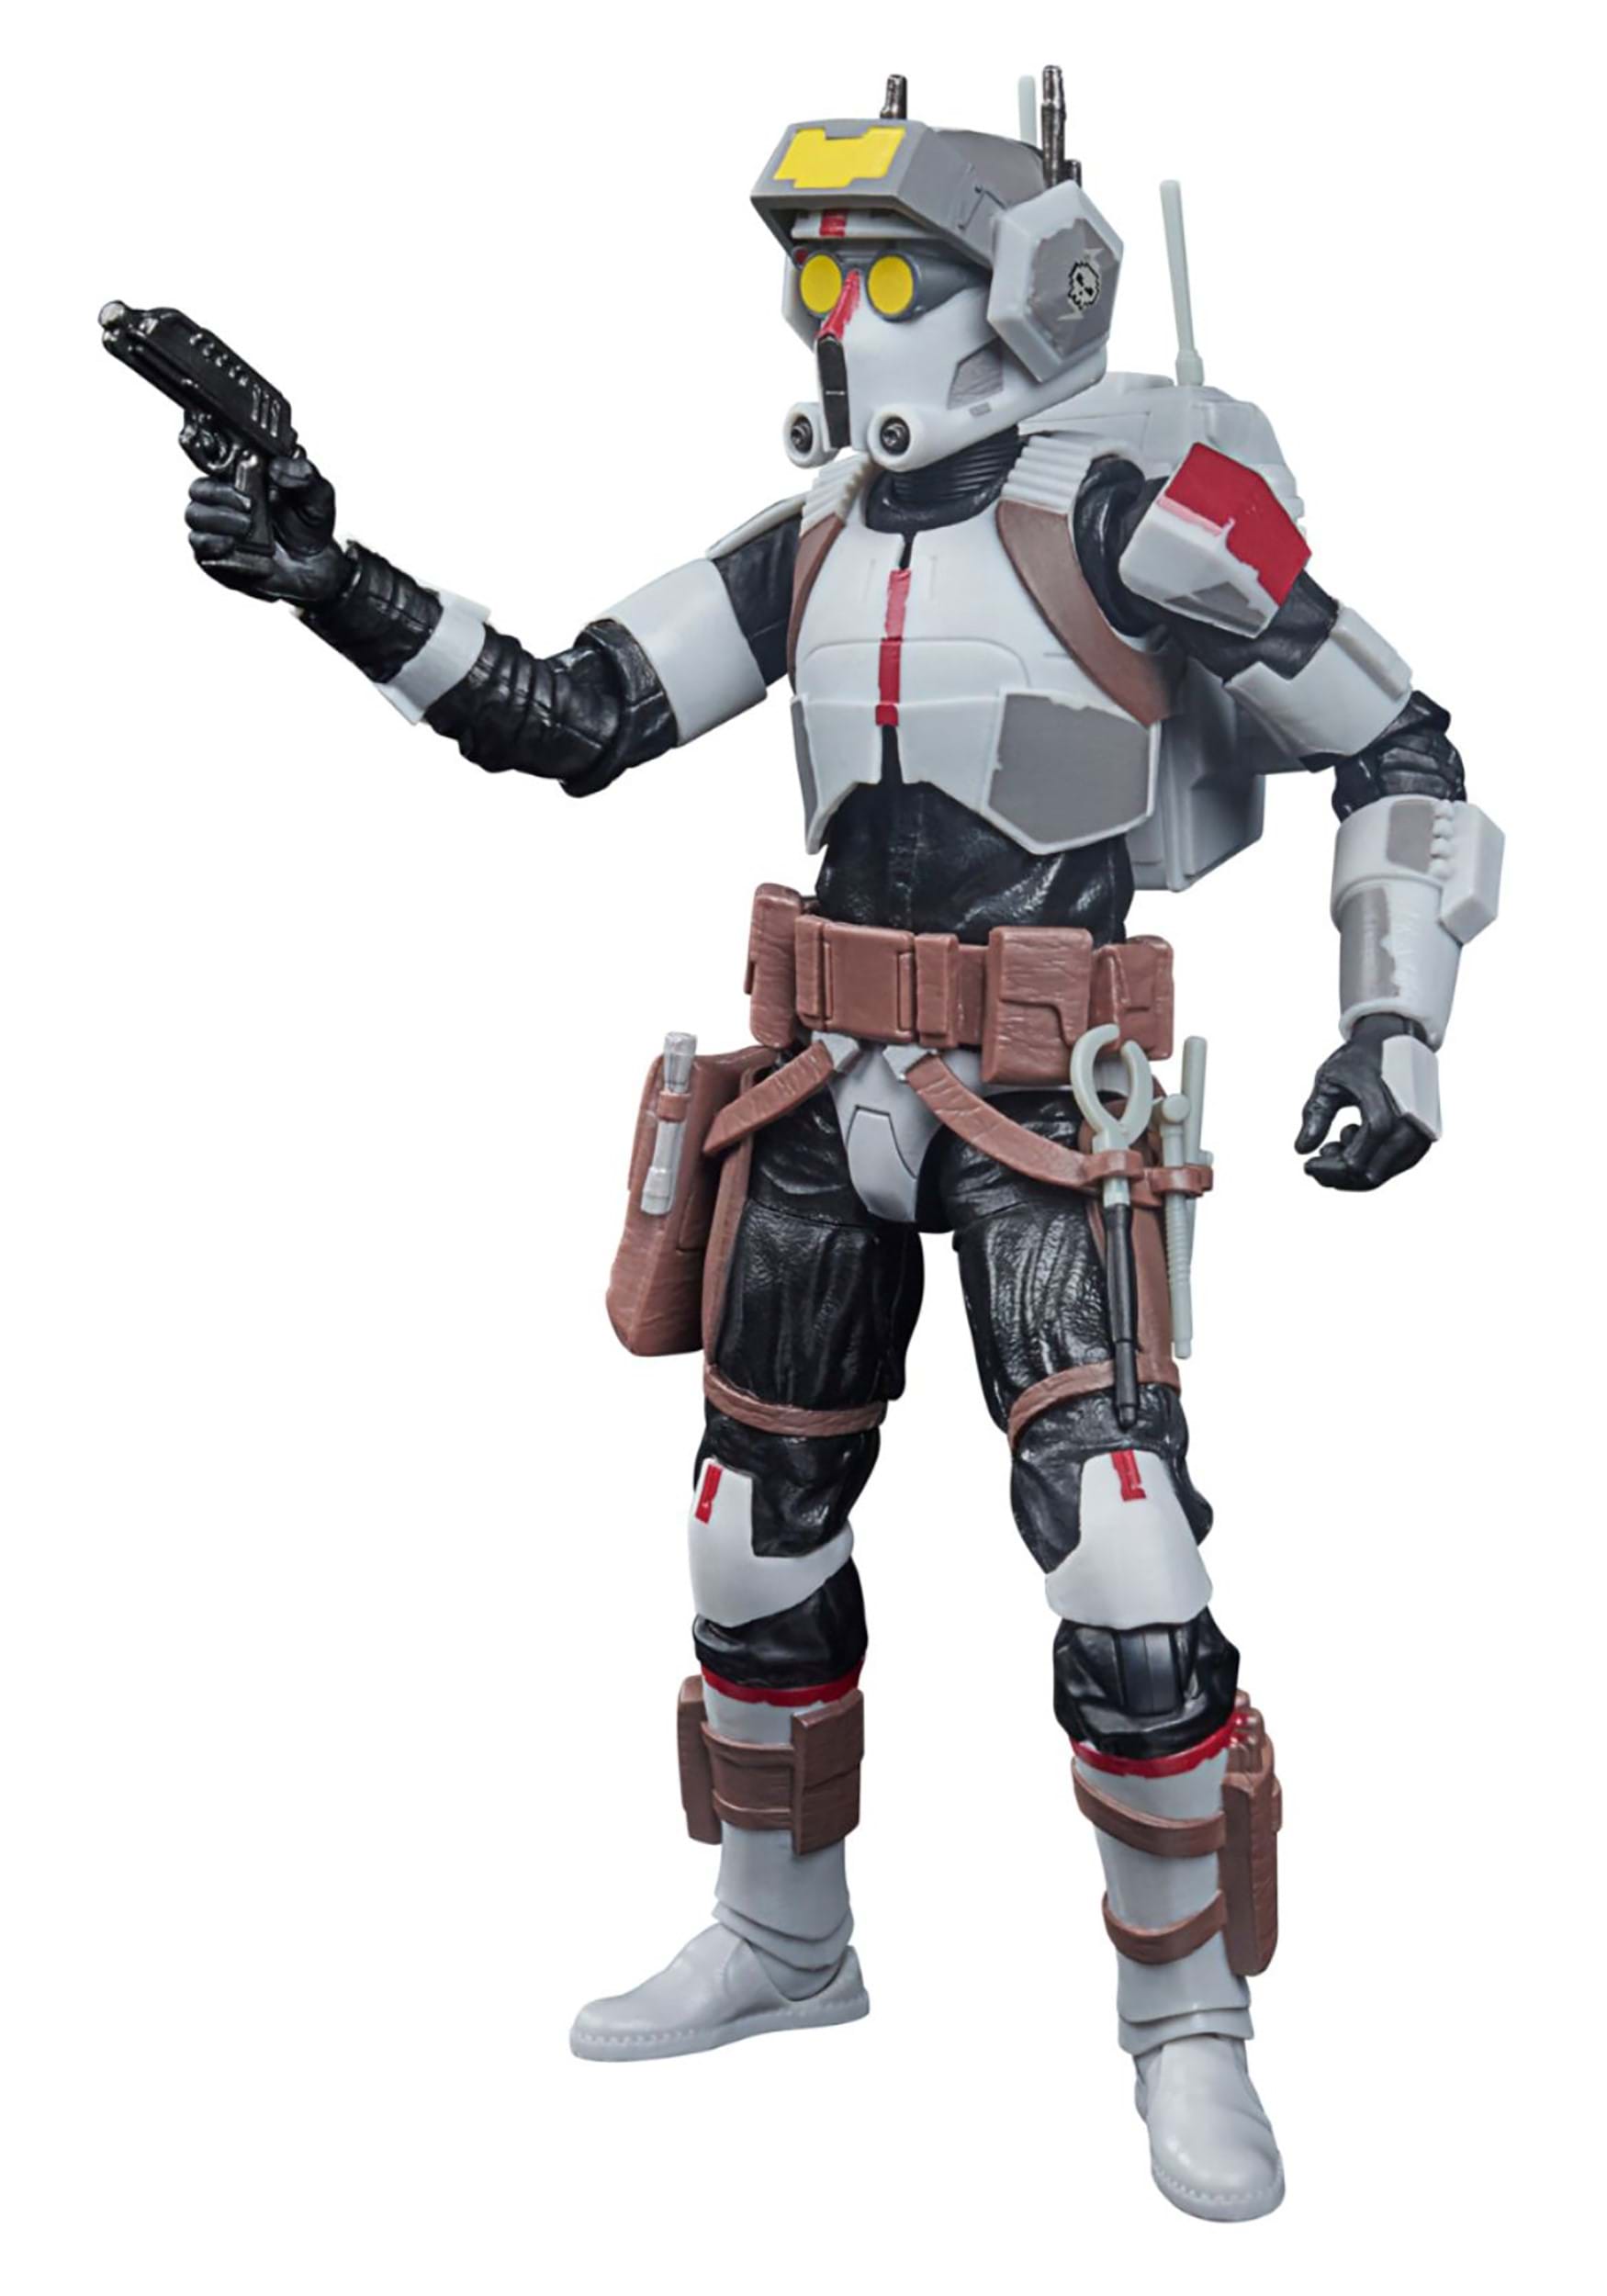 6-Inch Star Wars The Black Series Tech Action Figure